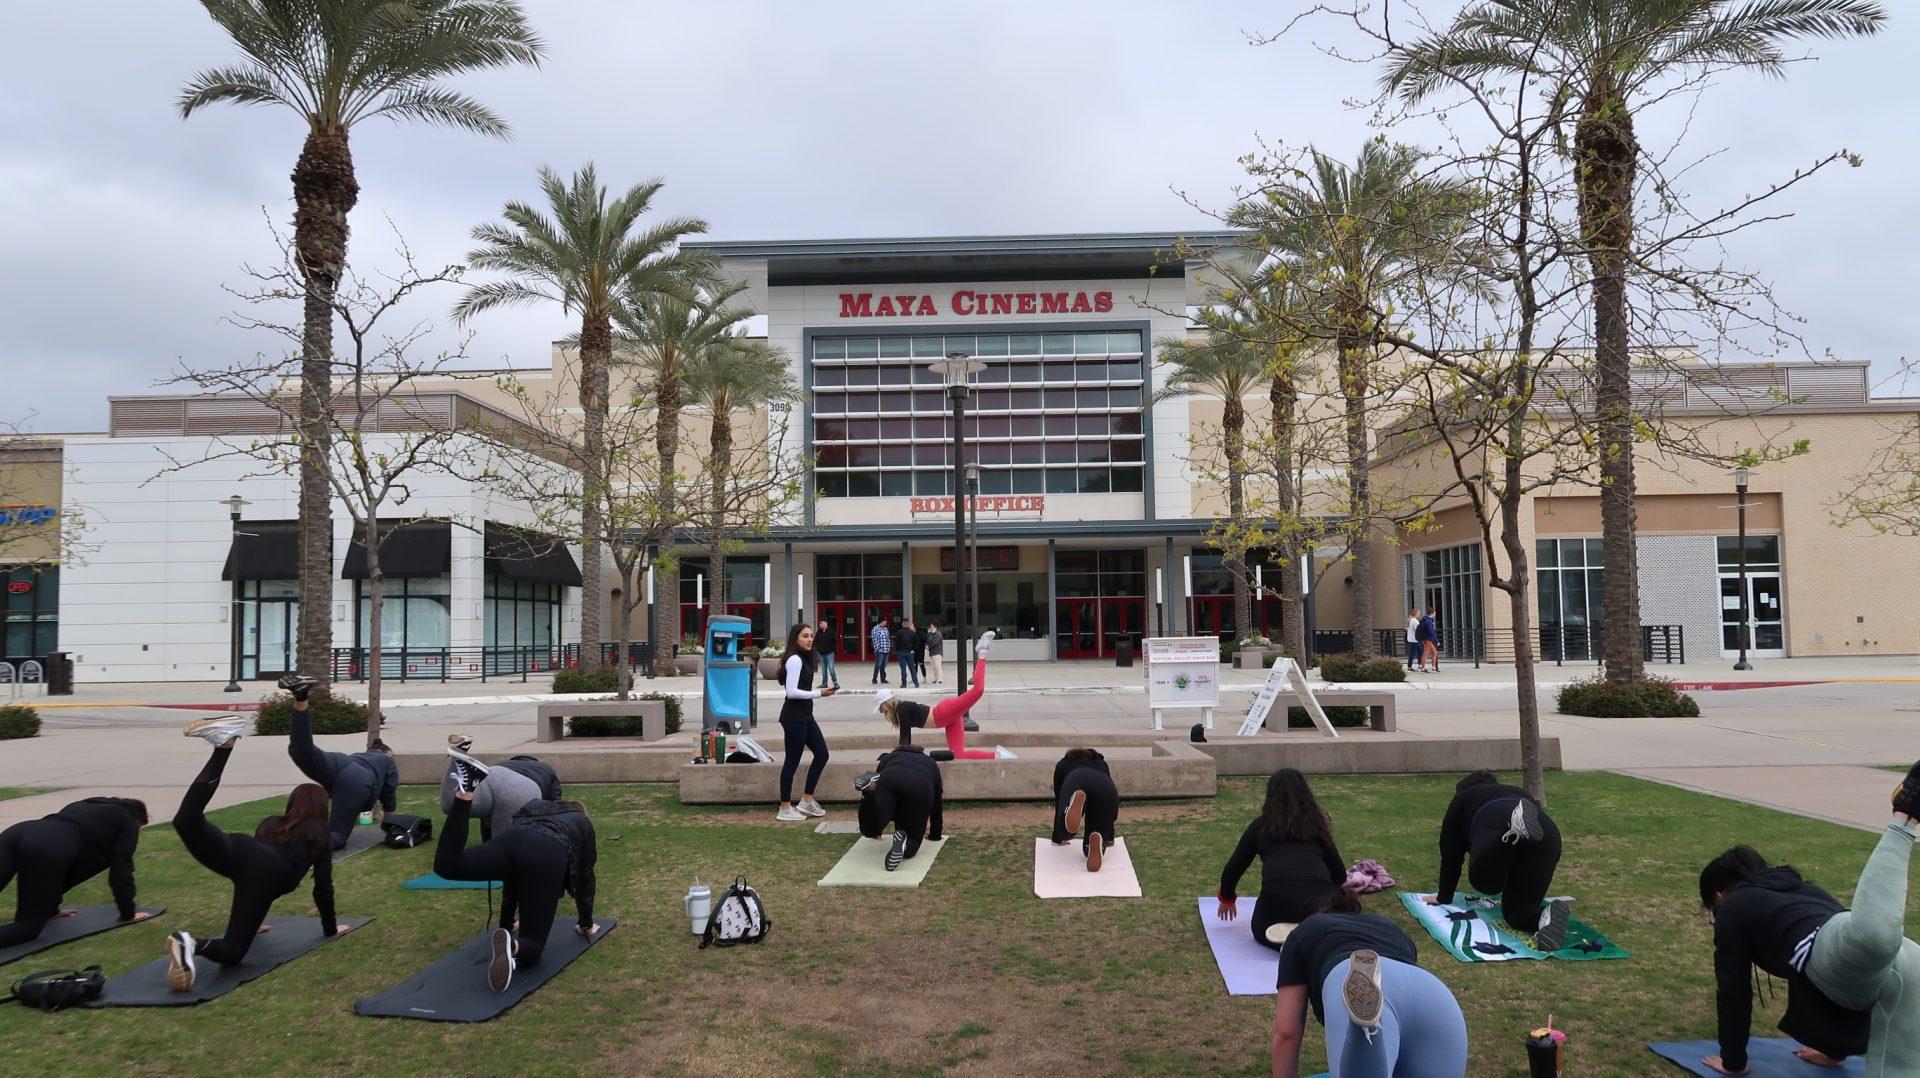 Gaona leads workouts in the square at Campus Pointe. (Viviana Hinojos/The Collegian)